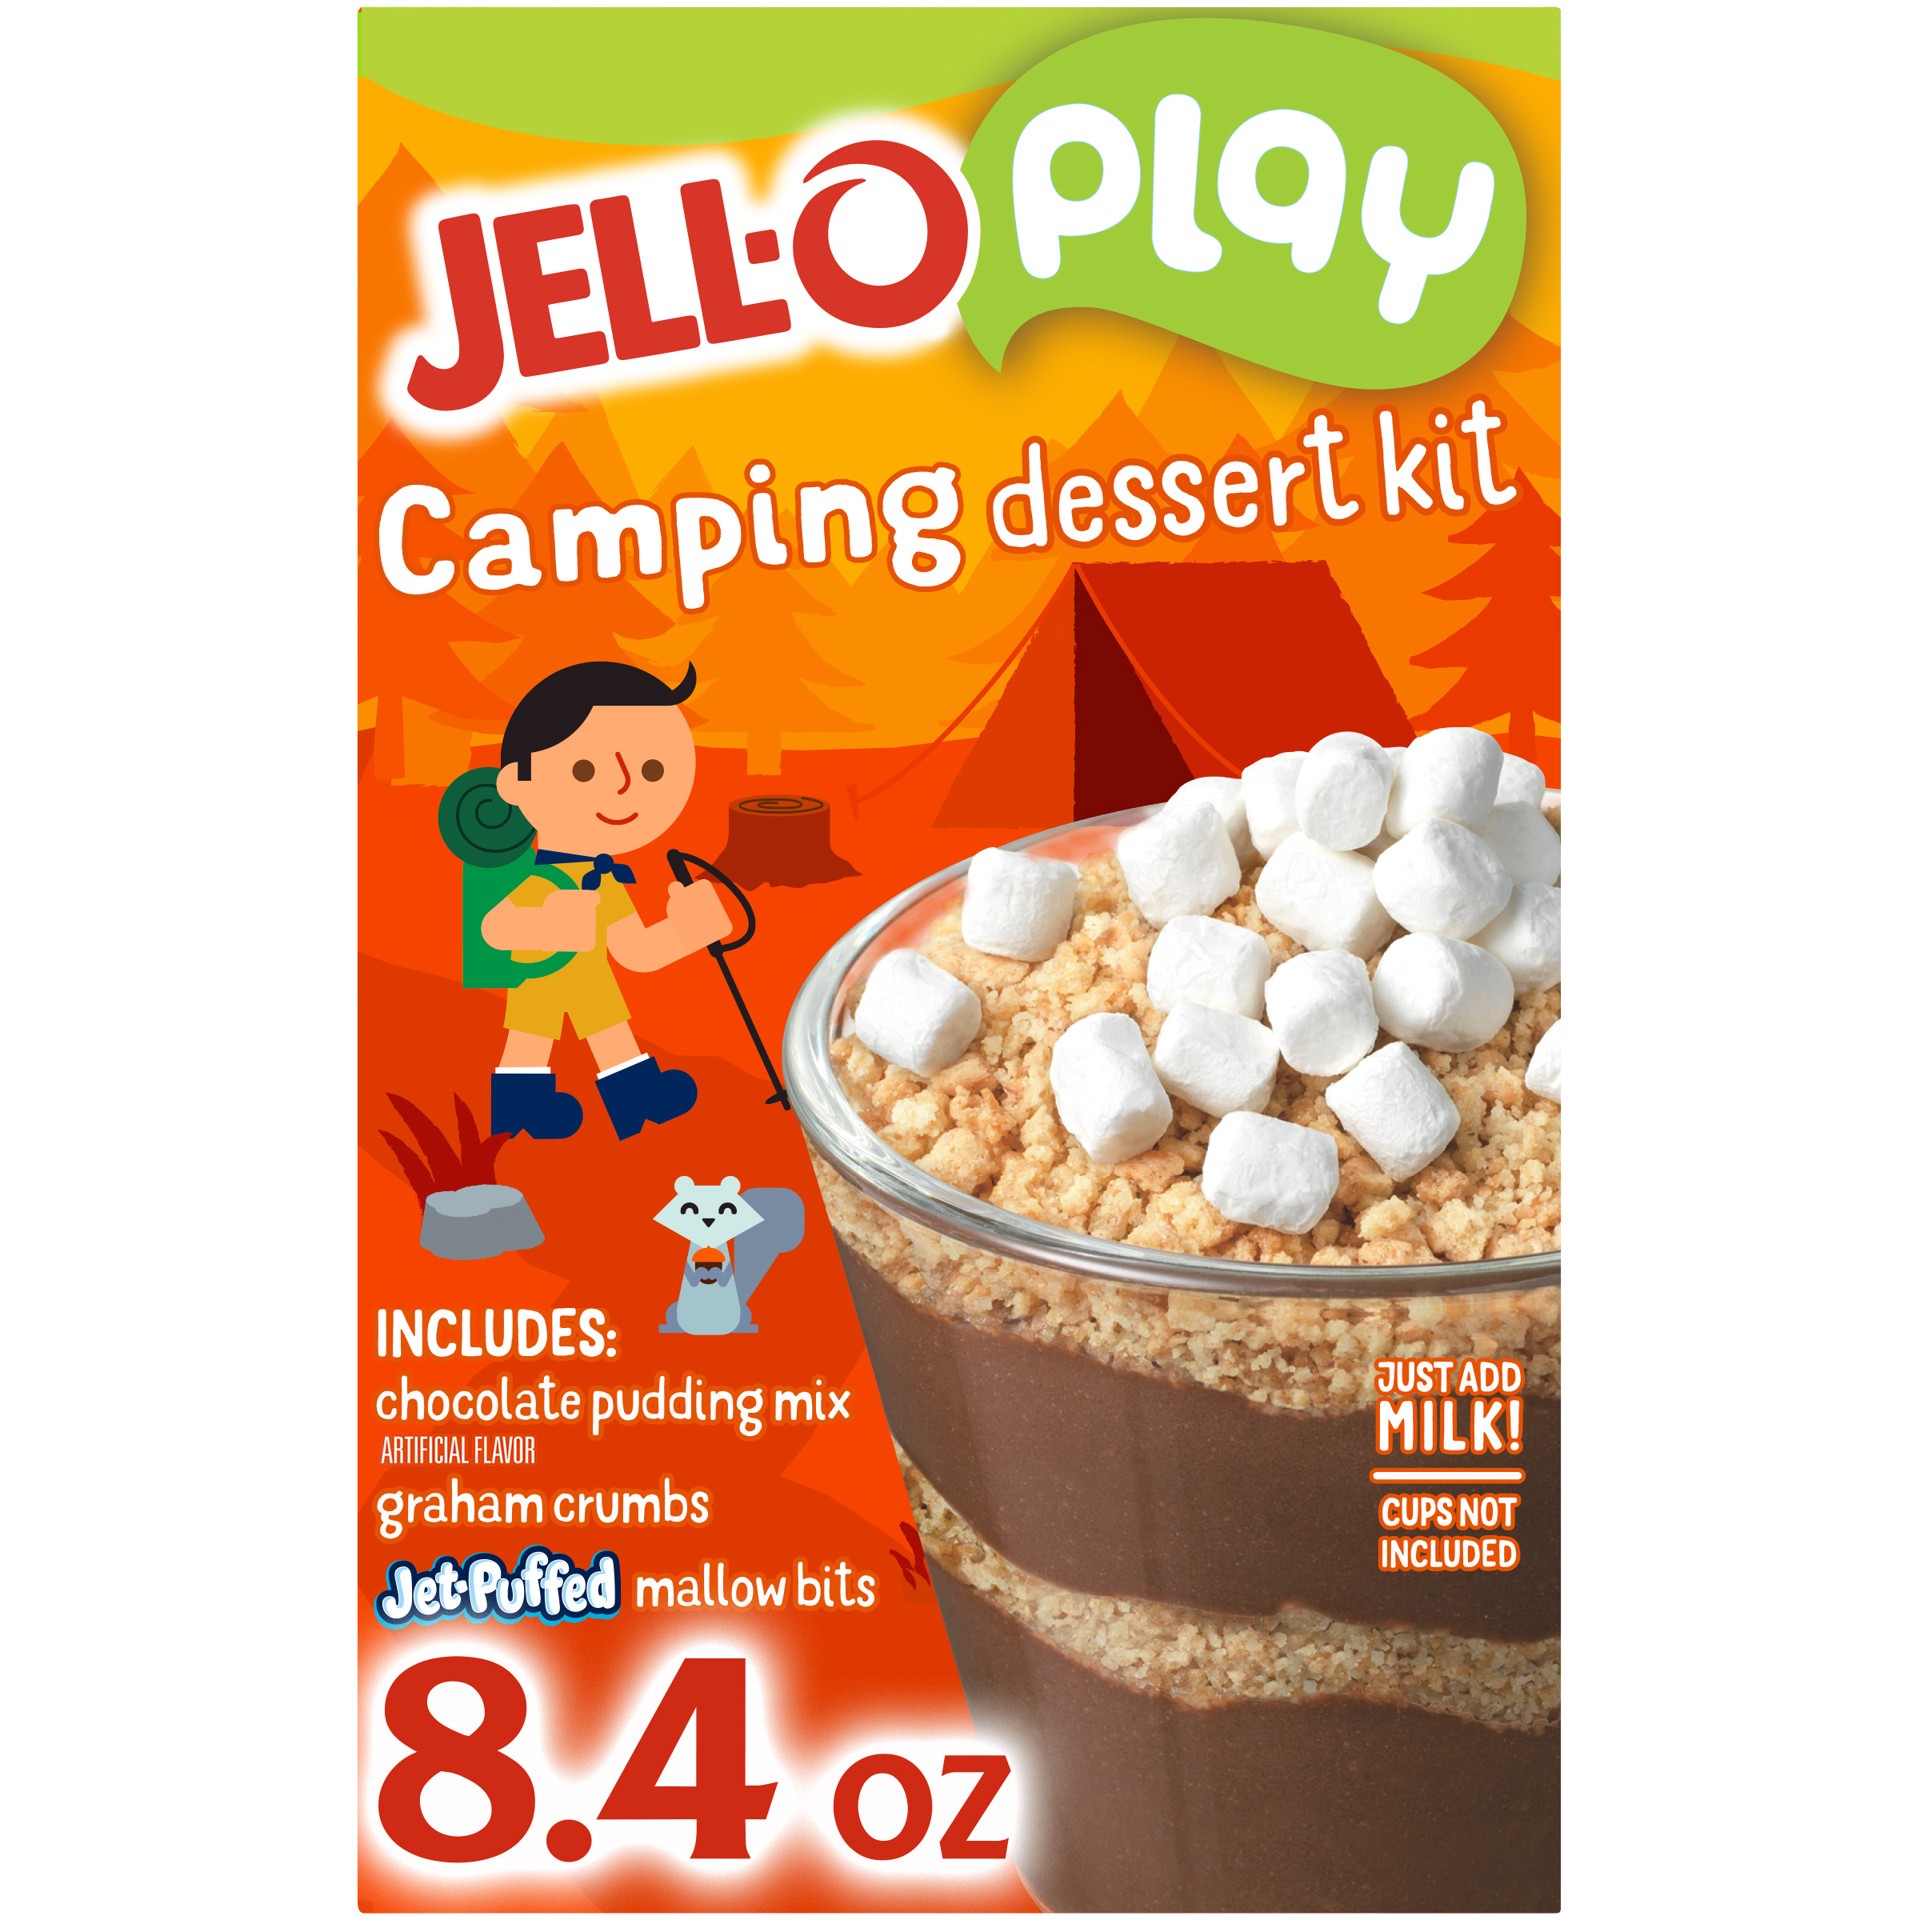 slide 1 of 11, Jell-O Play Camping Dessert Kit with Chocolate Pudding Mix, Graham Crumbs & Jet-Puffed Marshmallow Bits, 8.4 oz Box, 8.4 oz